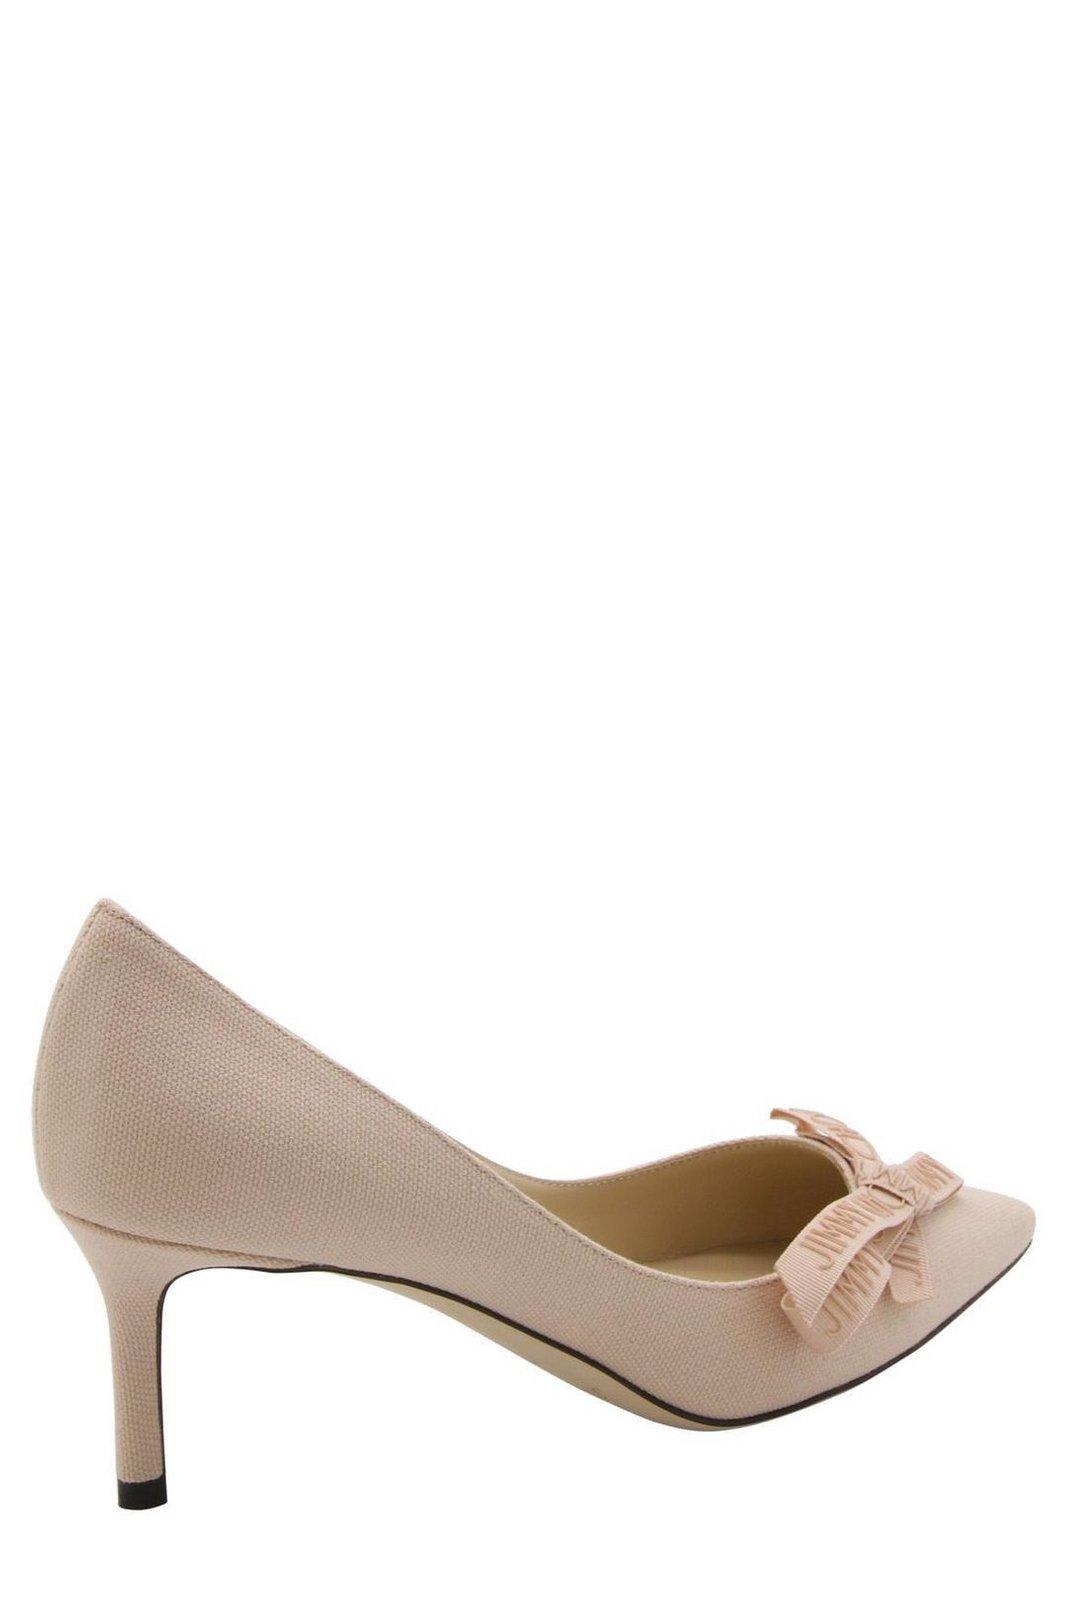 Shop Jimmy Choo Romy Bow Detailed Pointed Toe Pumps In Beige